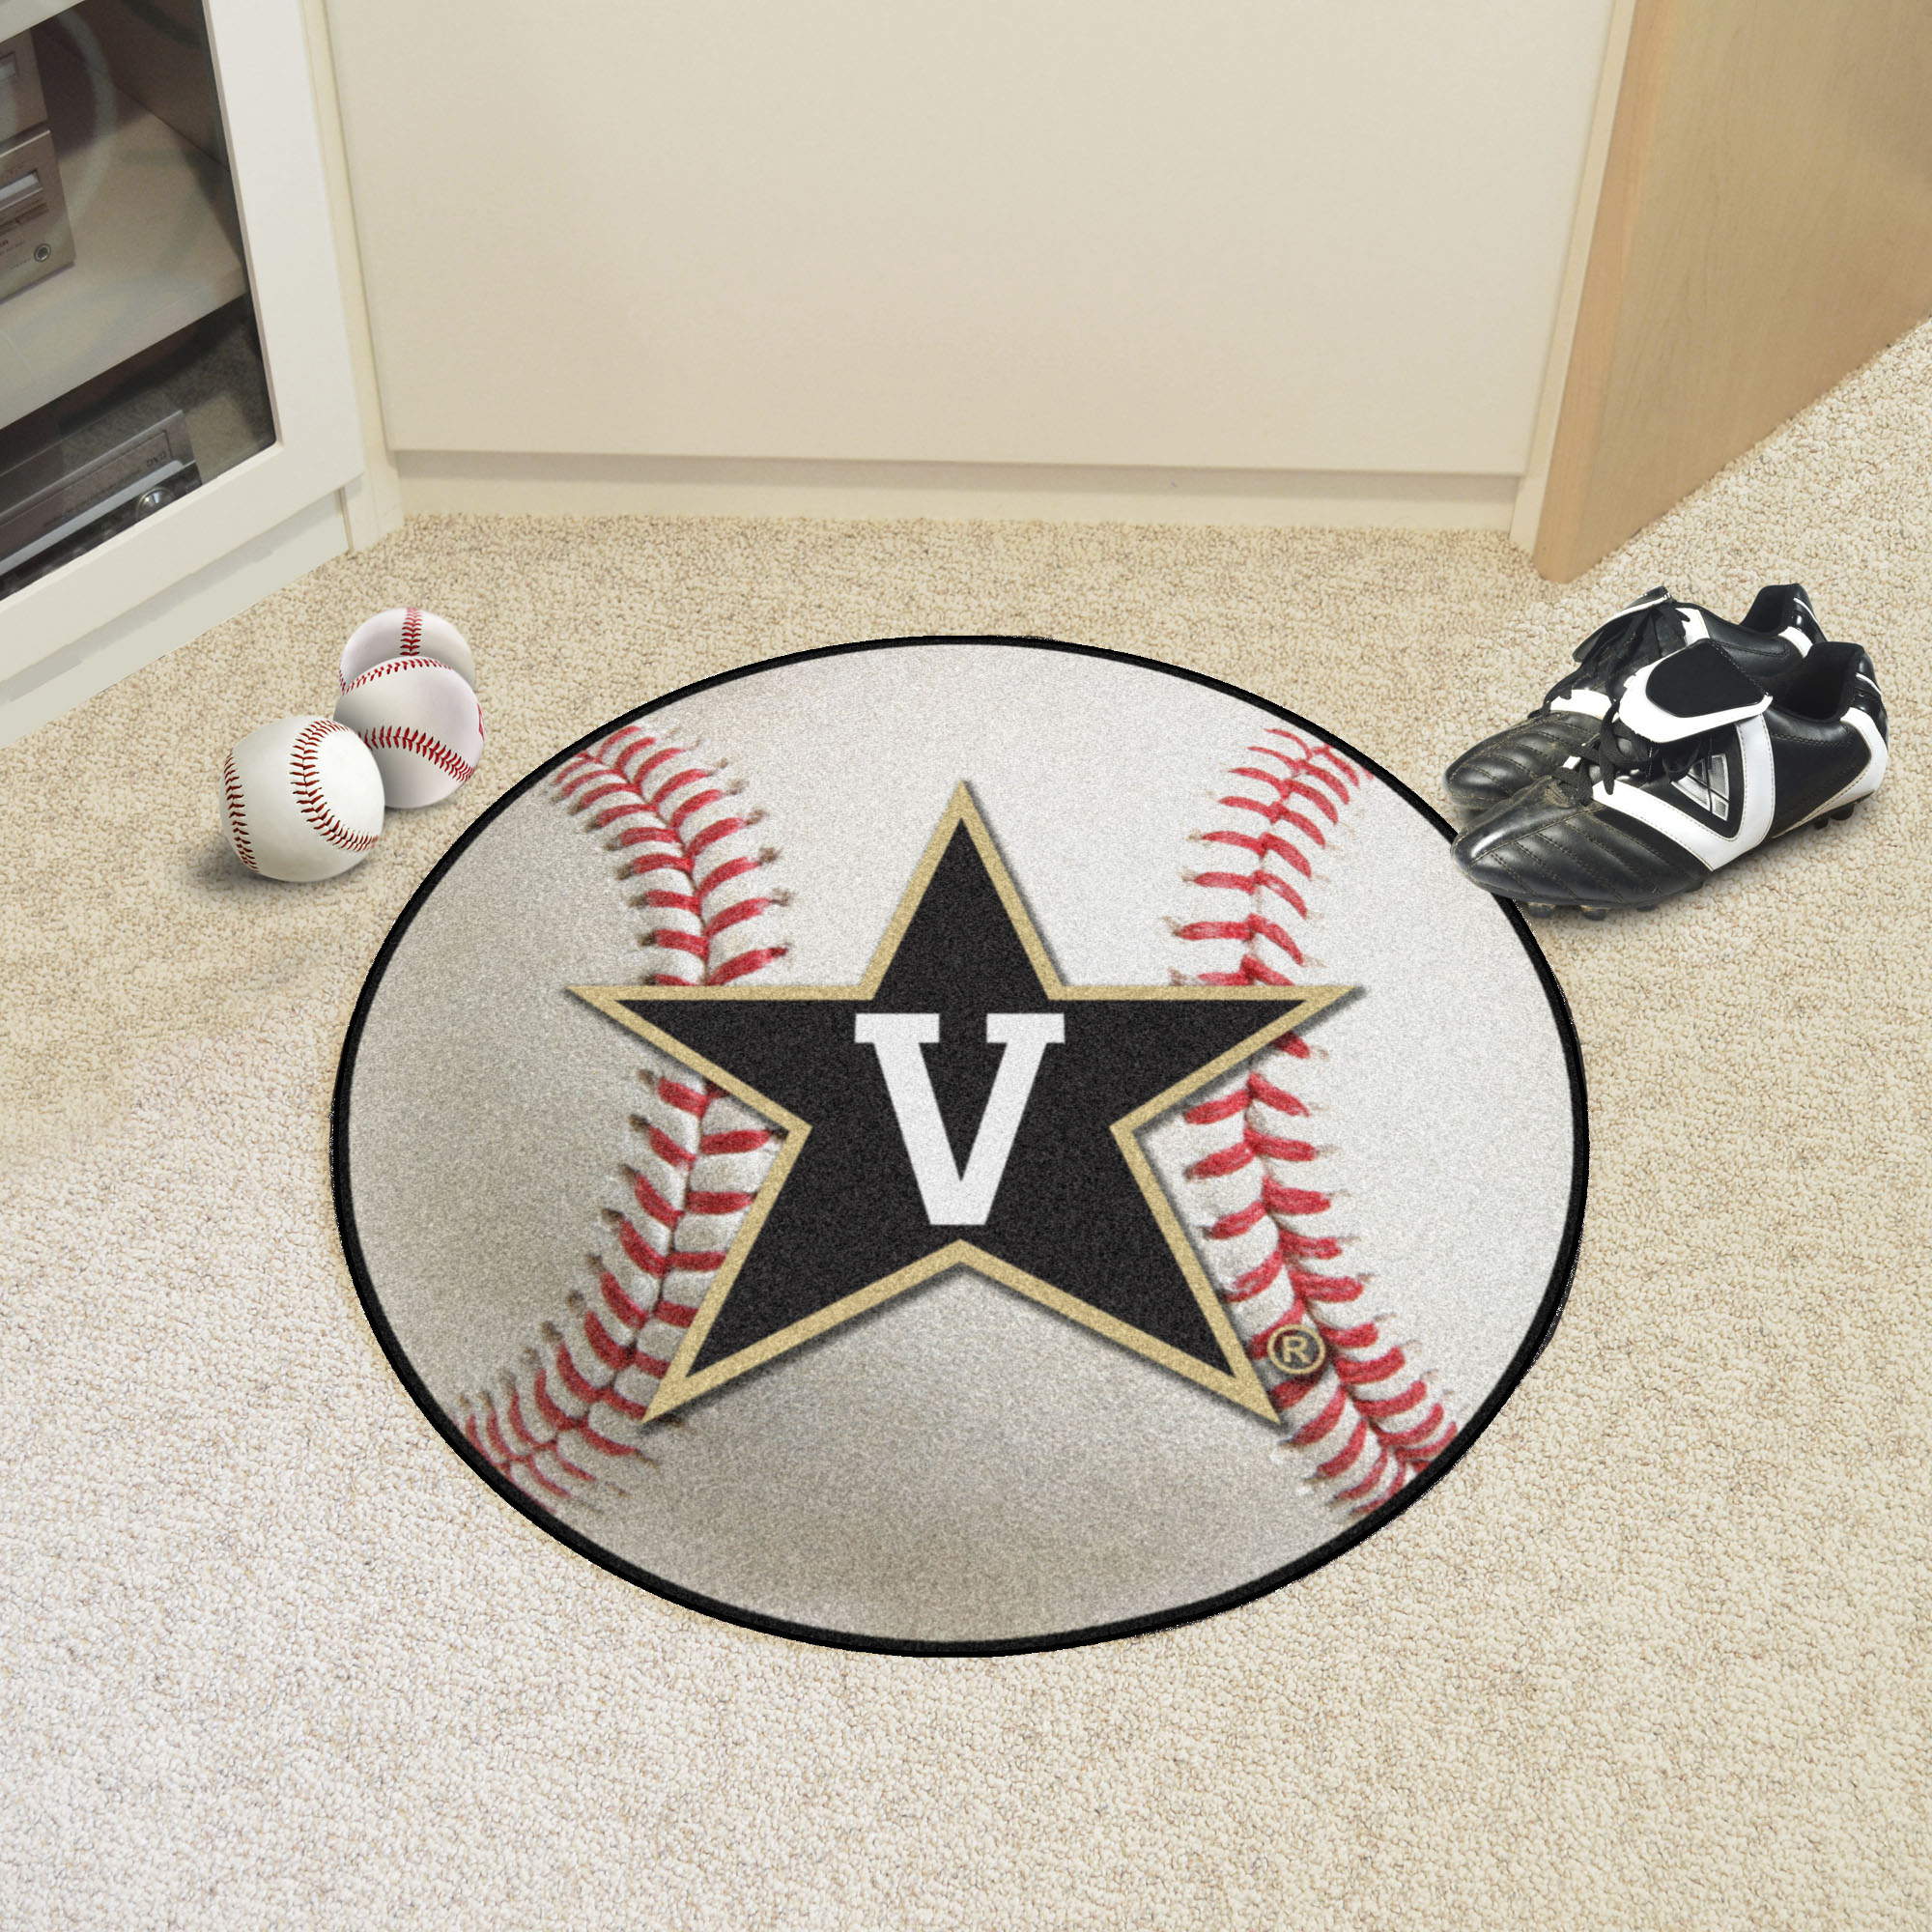 University of Vermont Ball Shaped Area Rugs (Ball Shaped Area Rugs: Basketball)